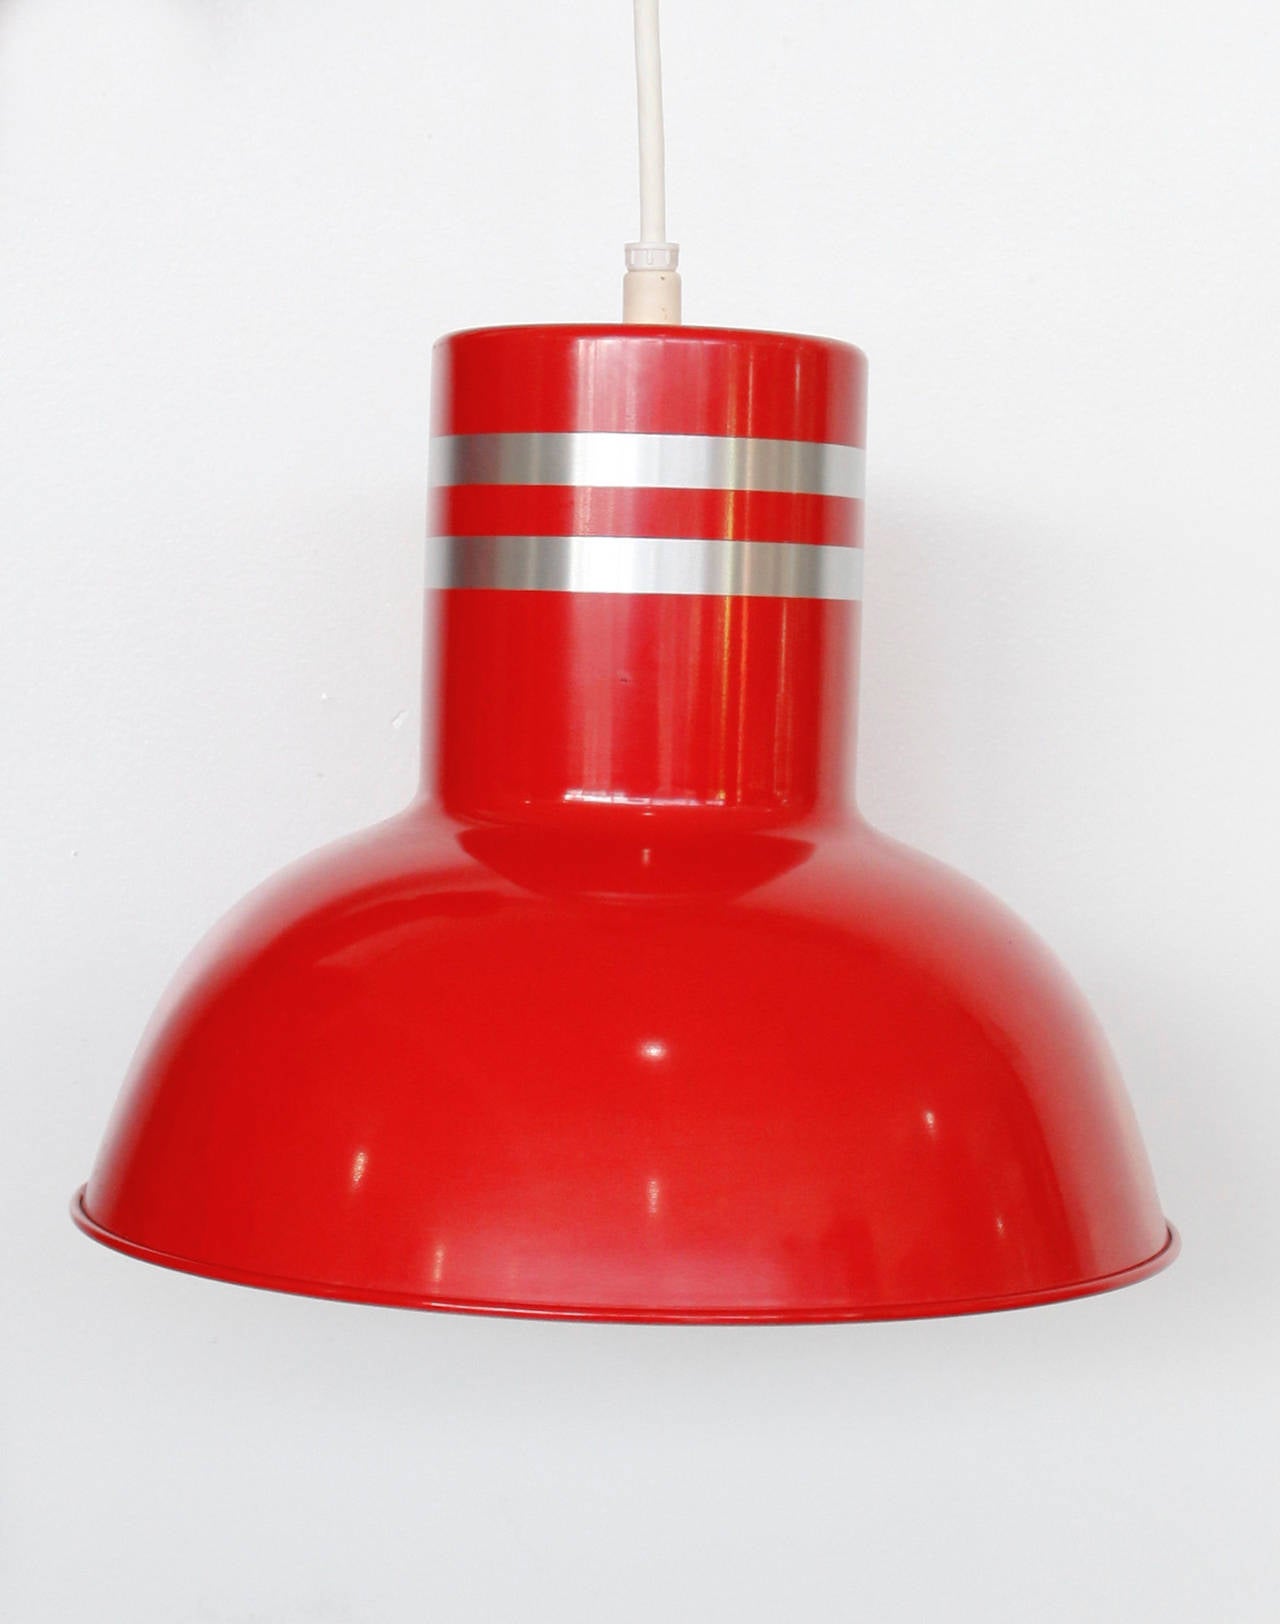 Very nice, bright red lightolier ceiling fixture lamp. Marked with original label. Working condition.